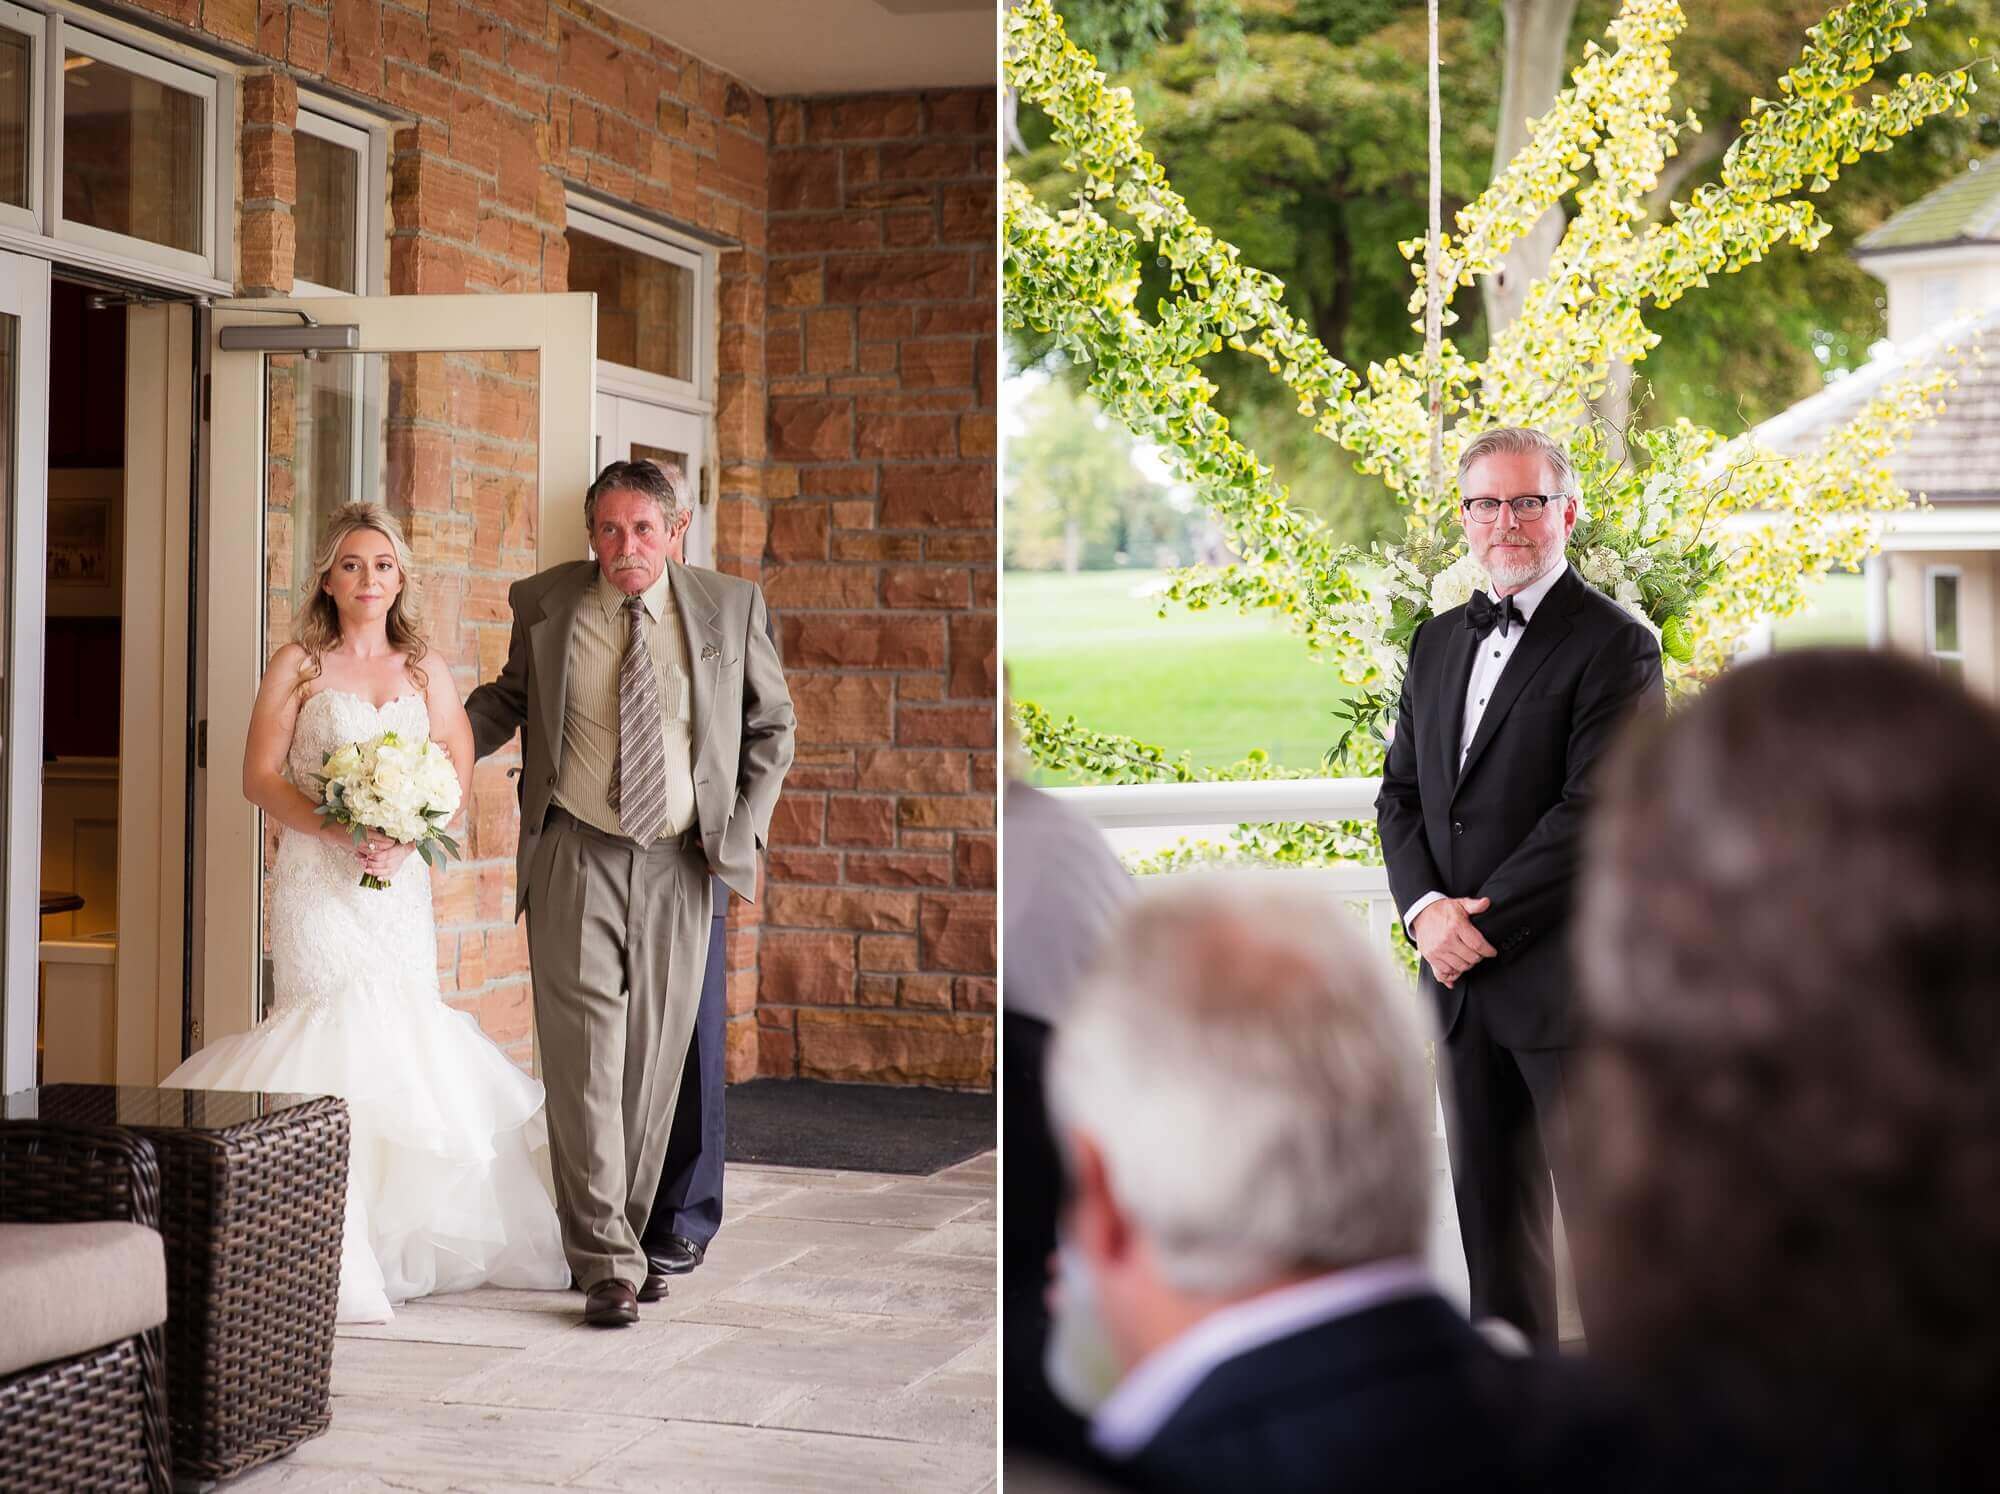 Bride walking down the aisle and the groom seeing her for the first time at Lambton Golf & Country Club